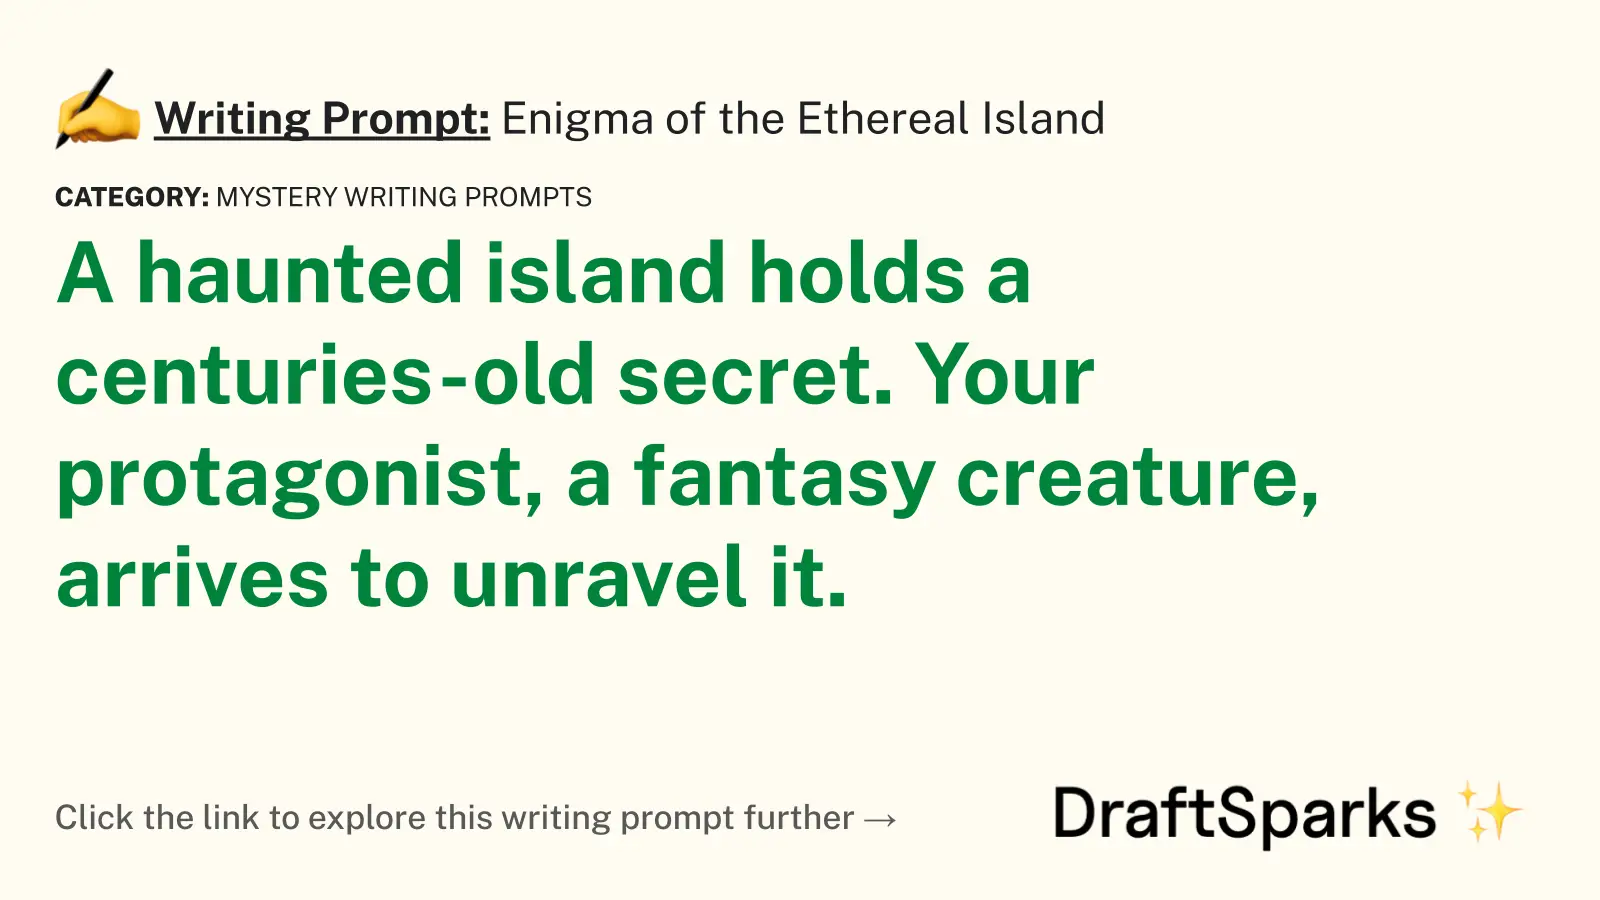 Enigma of the Ethereal Island